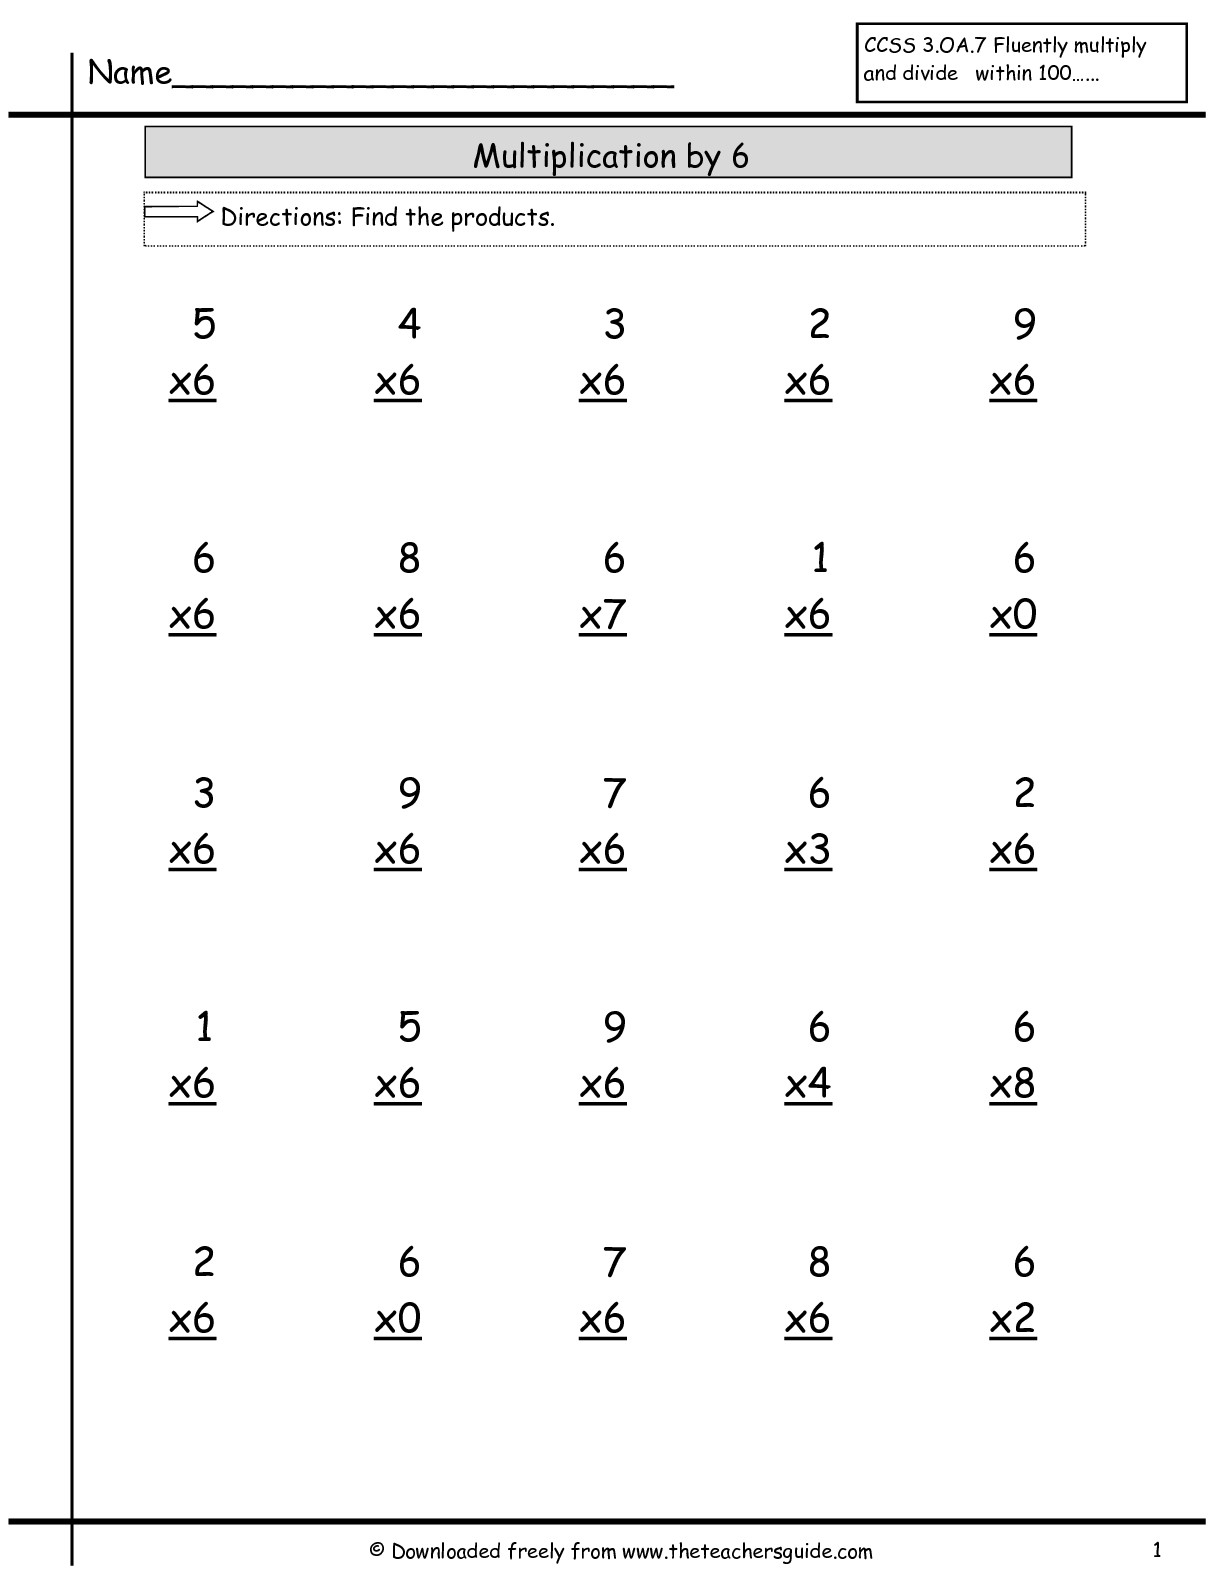 Multiplication Facts Worksheets From The Teacher&amp;#039;s Guide intended for Multiplication Worksheets 7S